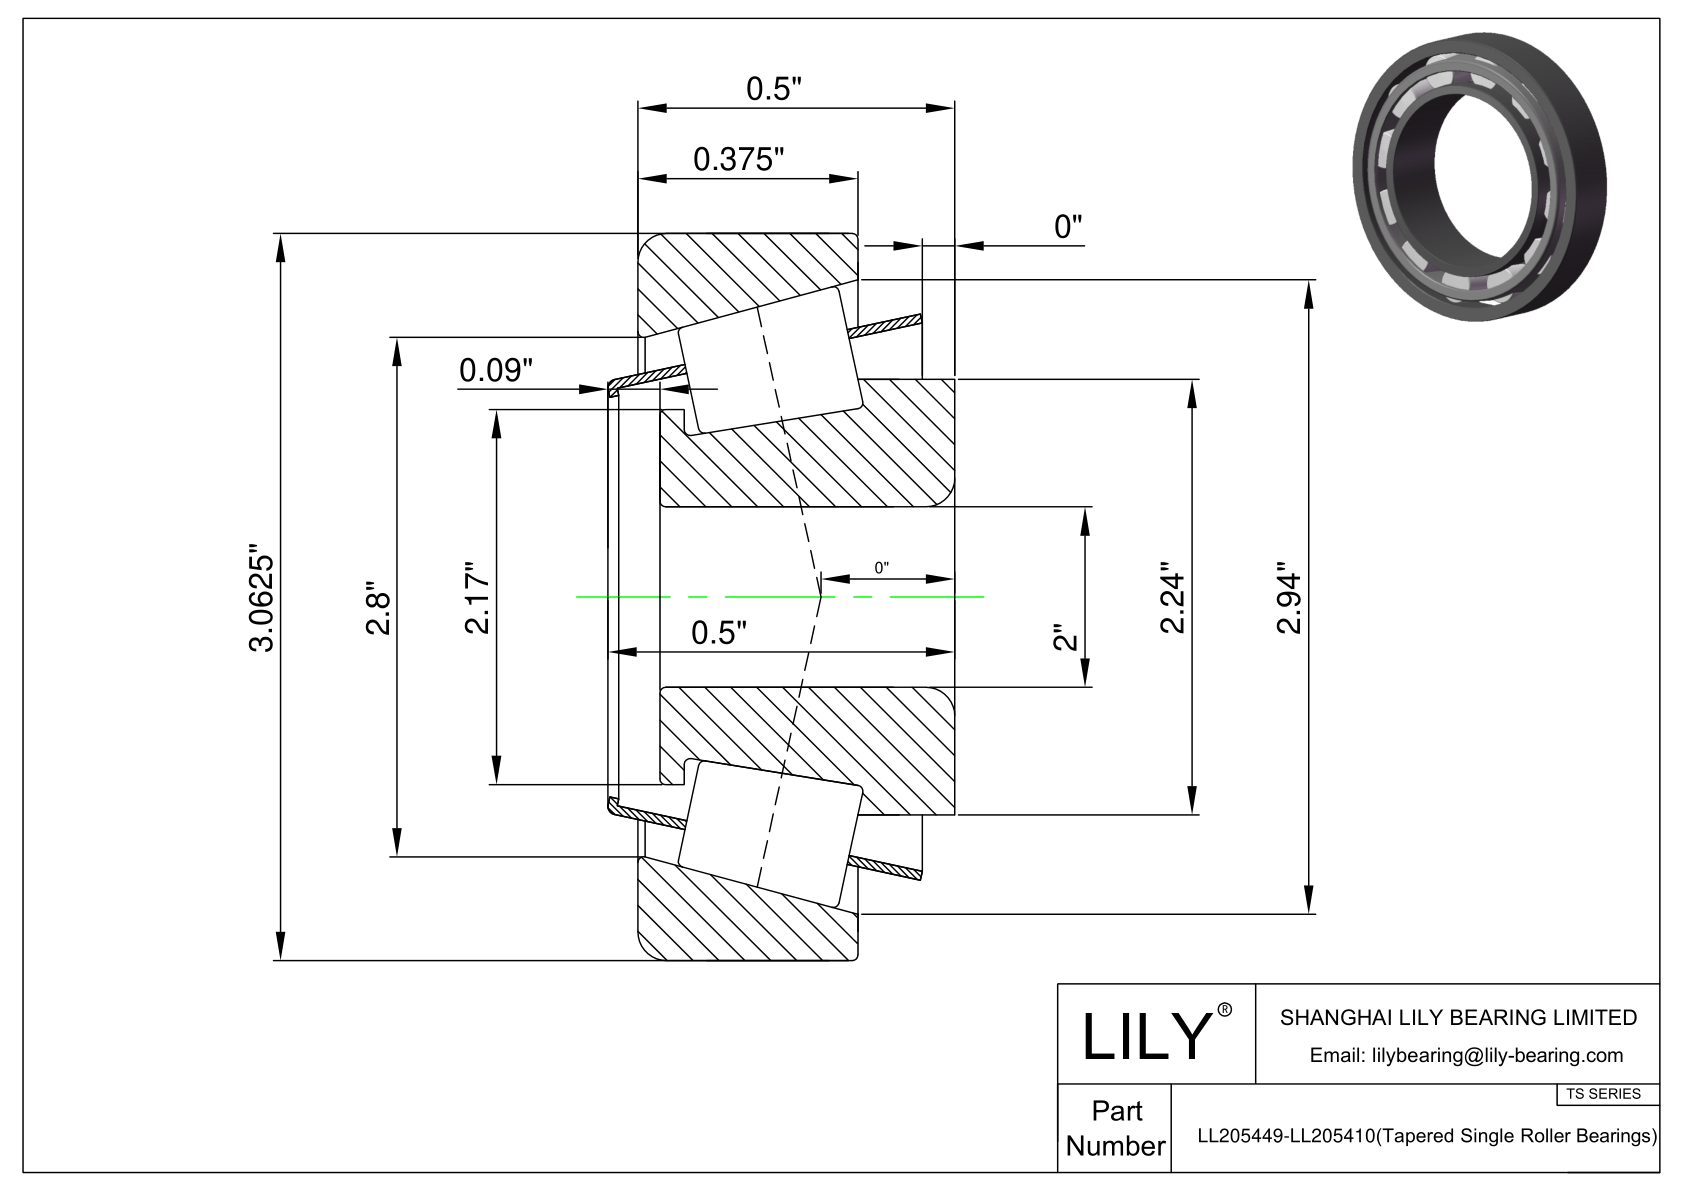 LL205449-LL205410 TS (Tapered Single Roller Bearings) (Imperial) cad drawing